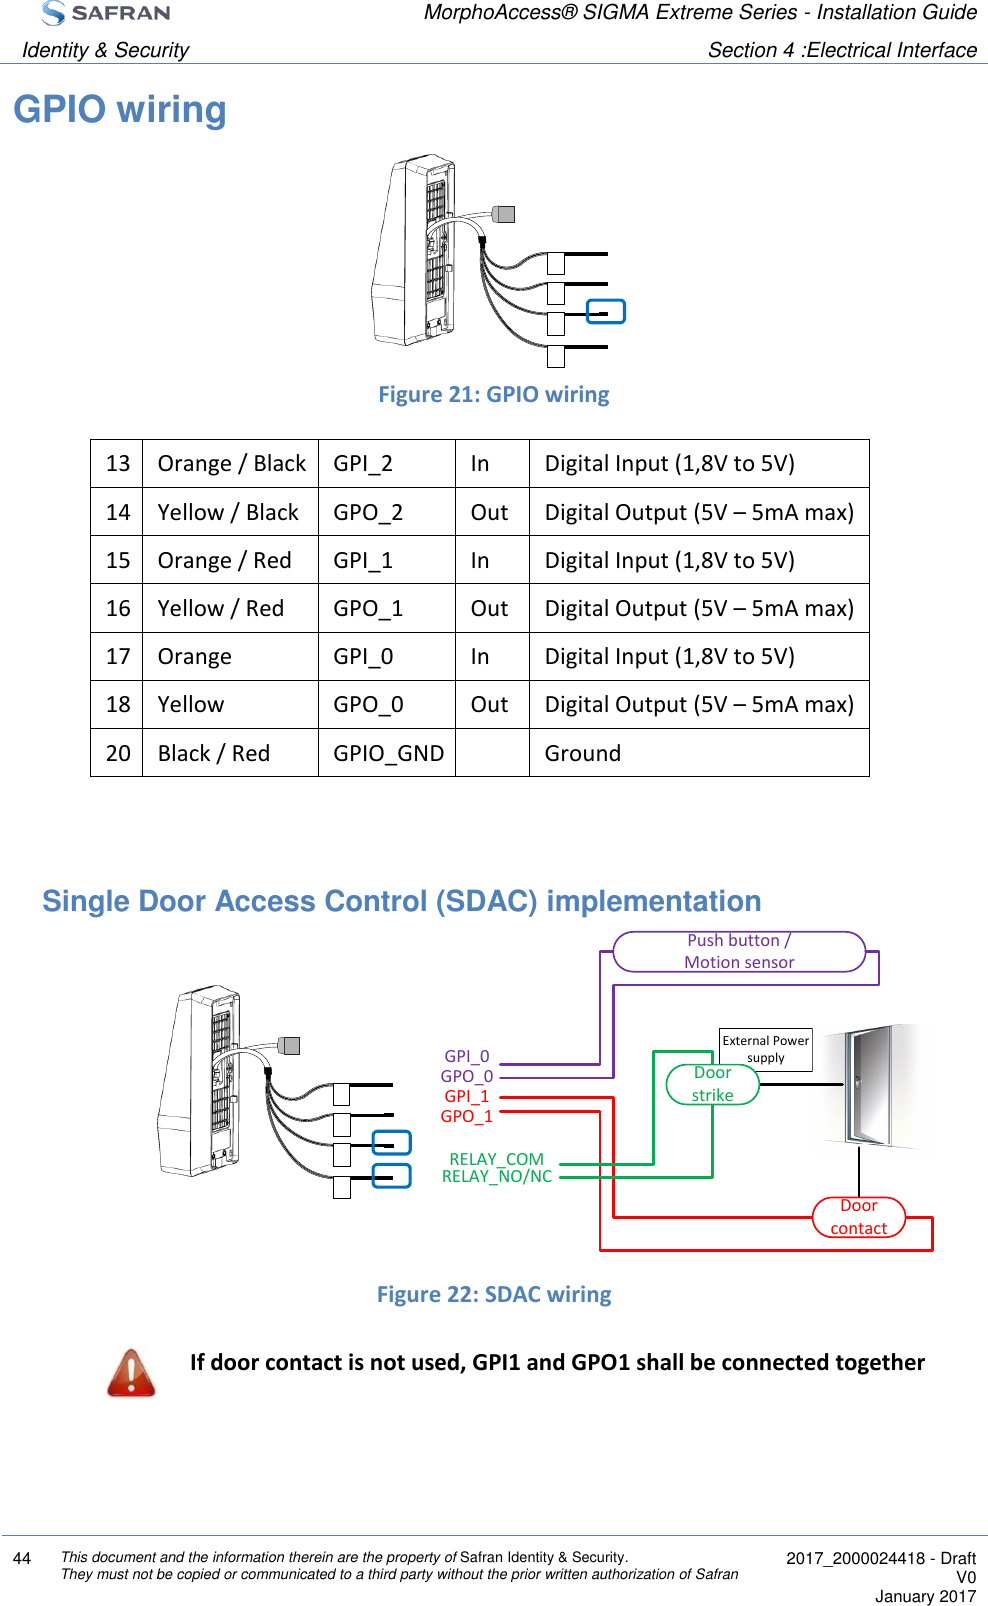  MorphoAccess® SIGMA Extreme Series - Installation Guide  Identity &amp; Security Section 4 :Electrical Interface  44 This document and the information therein are the property of Safran Identity &amp; Security. They must not be copied or communicated to a third party without the prior written authorization of Safran  2017_2000024418 - Draft V0 January 2017  GPIO wiring     Figure 21: GPIO wiring 13 Orange / Black GPI_2 In Digital Input (1,8V to 5V)  14 Yellow / Black GPO_2 Out Digital Output (5V – 5mA max)  15 Orange / Red GPI_1 In Digital Input (1,8V to 5V)  16 Yellow / Red GPO_1 Out Digital Output (5V – 5mA max) 17 Orange GPI_0 In Digital Input (1,8V to 5V)  18 Yellow GPO_0 Out Digital Output (5V – 5mA max) 20 Black / Red GPIO_GND  Ground   Single Door Access Control (SDAC) implementation         Figure 22: SDAC wiring  If door contact is not used, GPI1 and GPO1 shall be connected together External Power supplyGPI_1GPO_0Push button /Motion sensorGPI_0GPO_1RELAY_COMRELAY_NO/NCDoor contactDoor strike